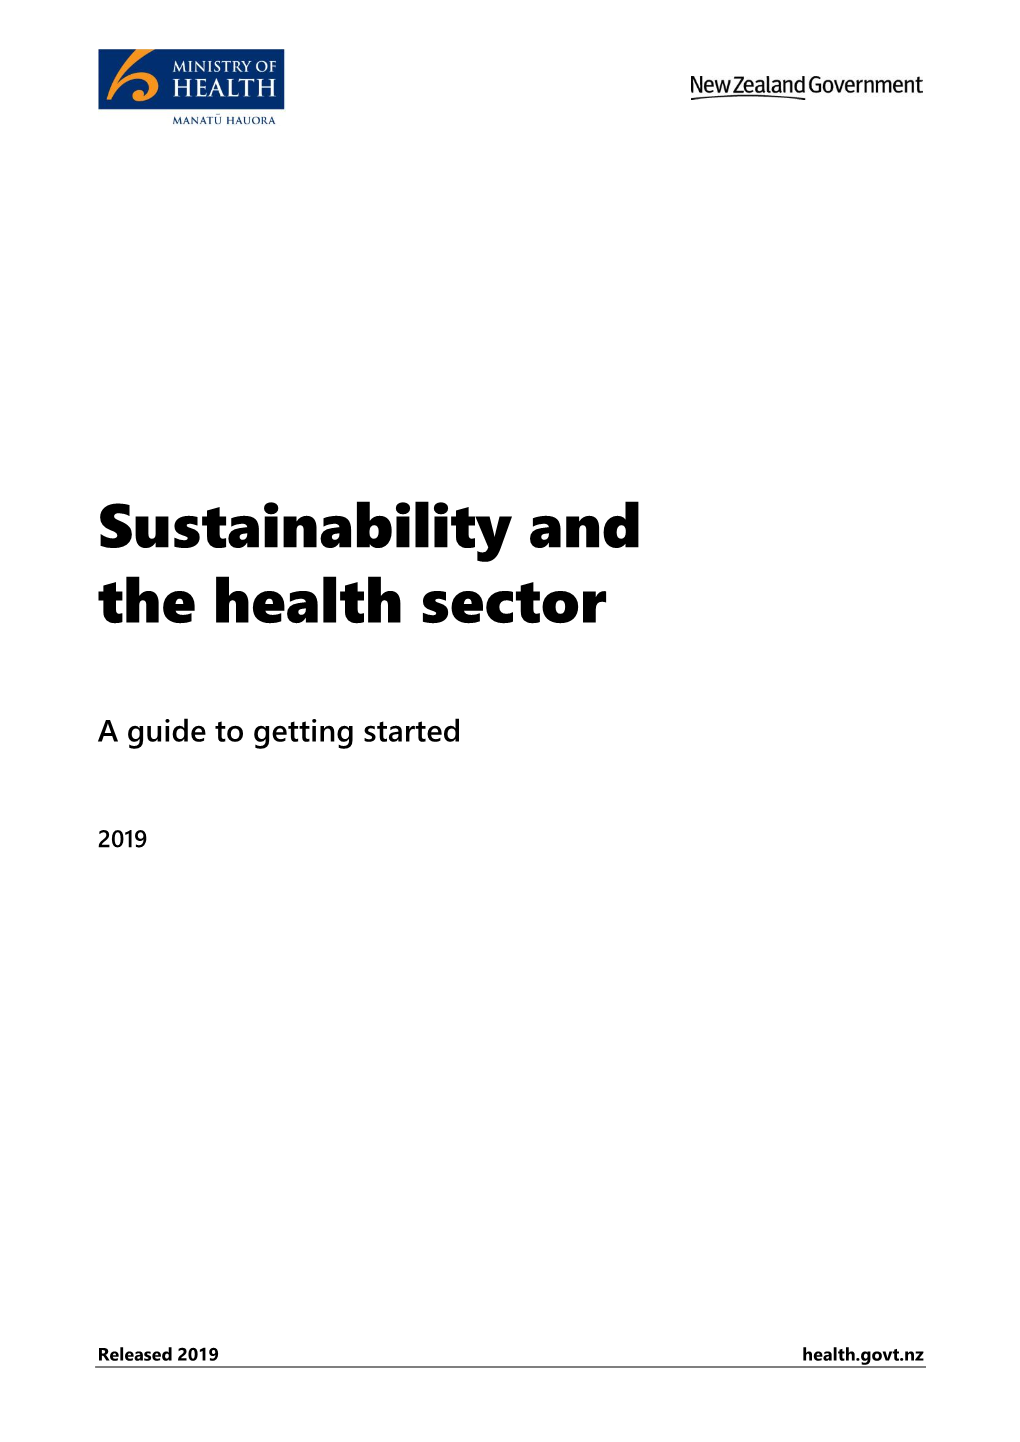 Sustainability and the Health Sector: a Guide to Getting Started